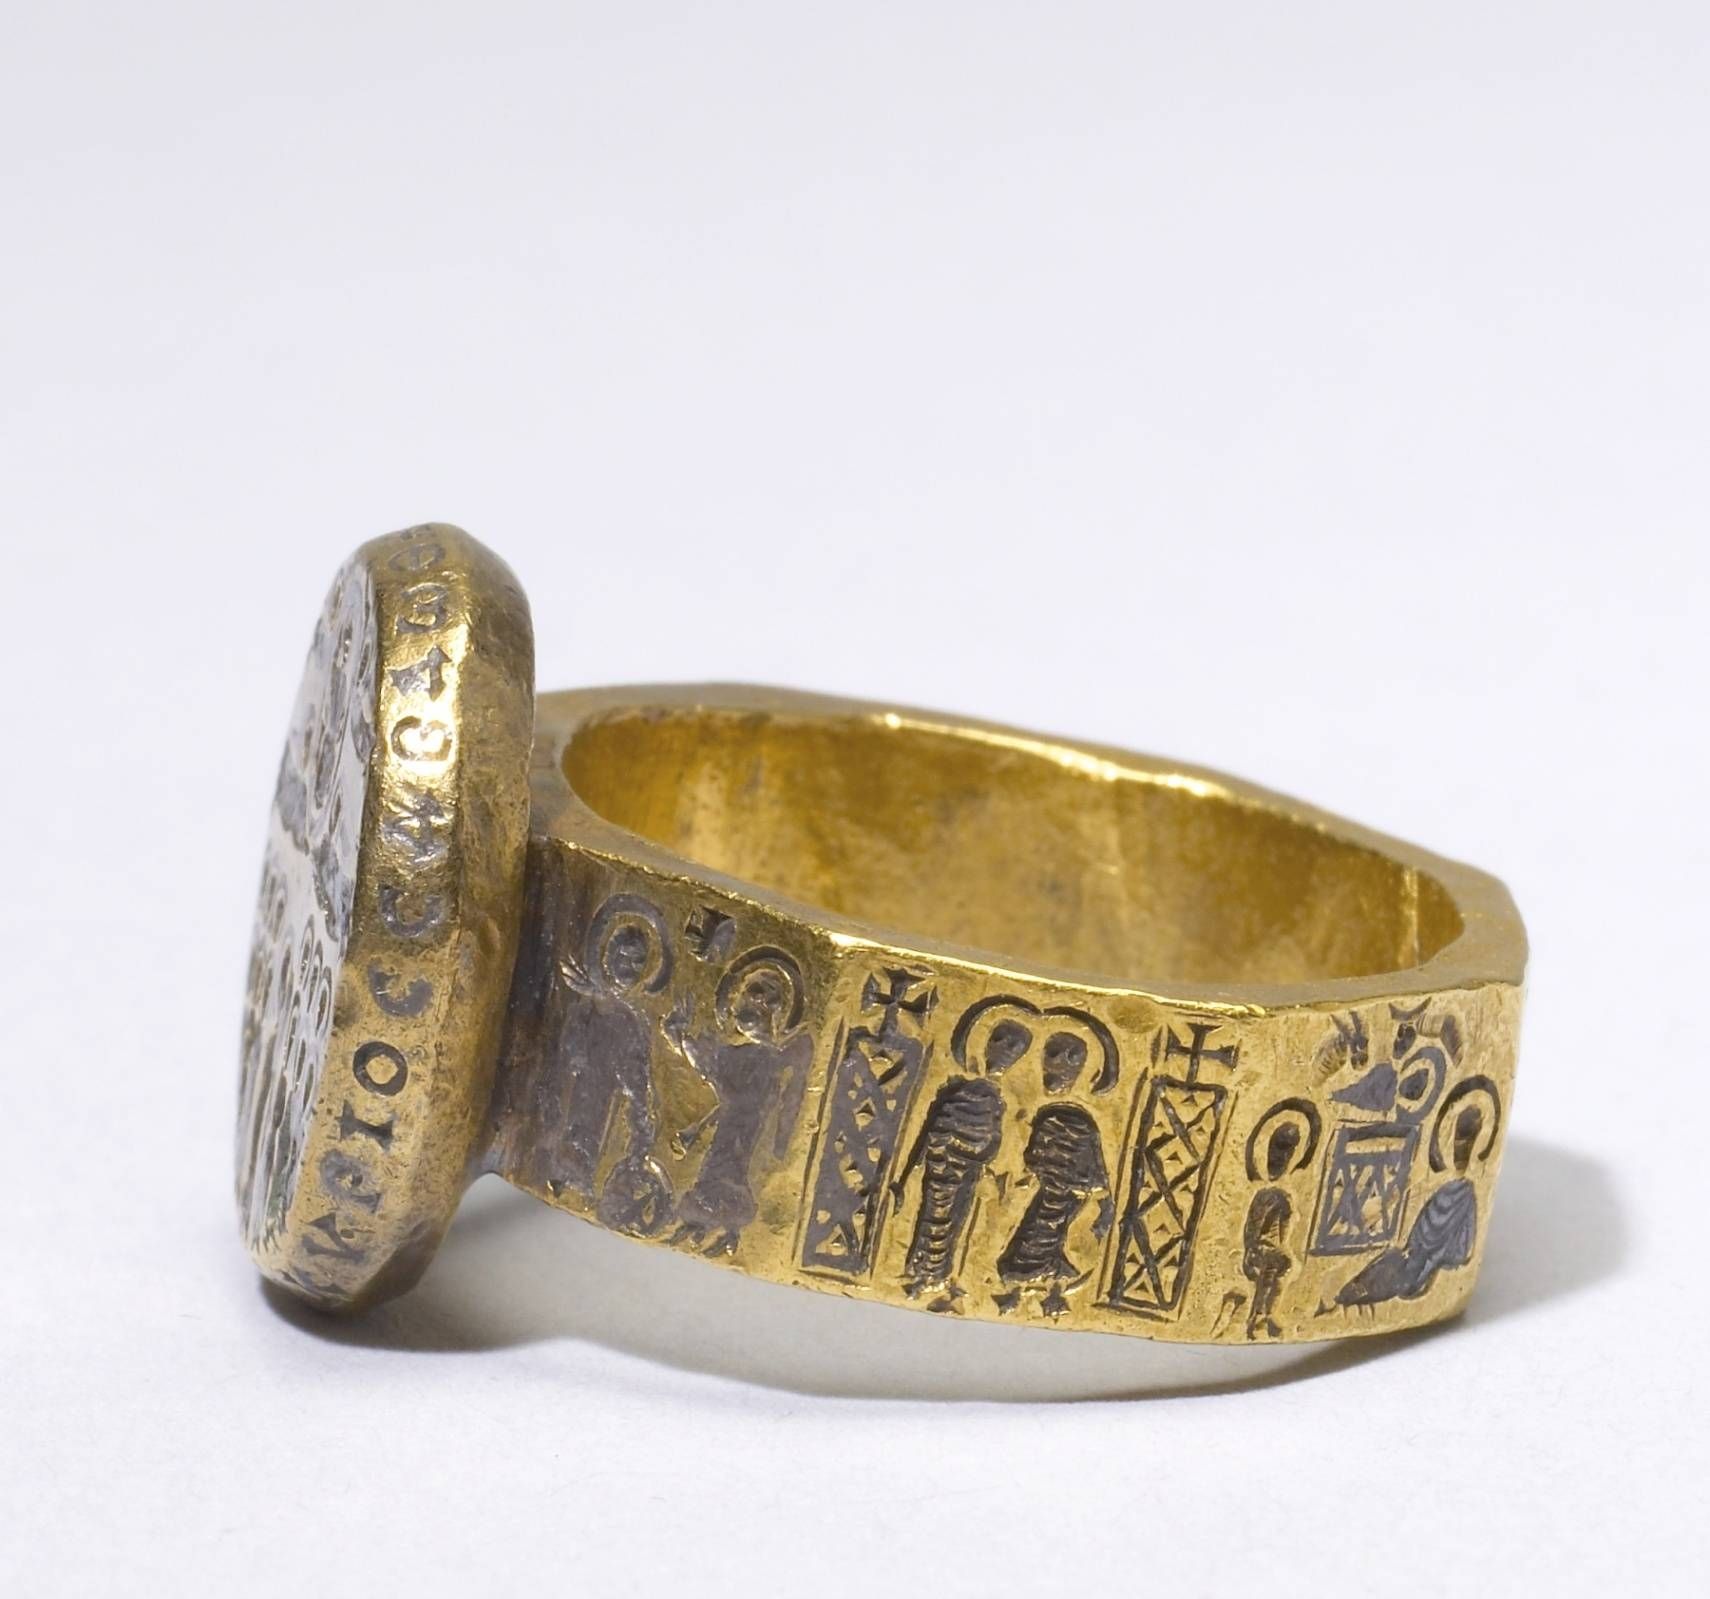 Manificent Design Egyptian Wedding Rings Most Popular Rings Pertaining To Egyptian Wedding Bands (View 2 of 15)